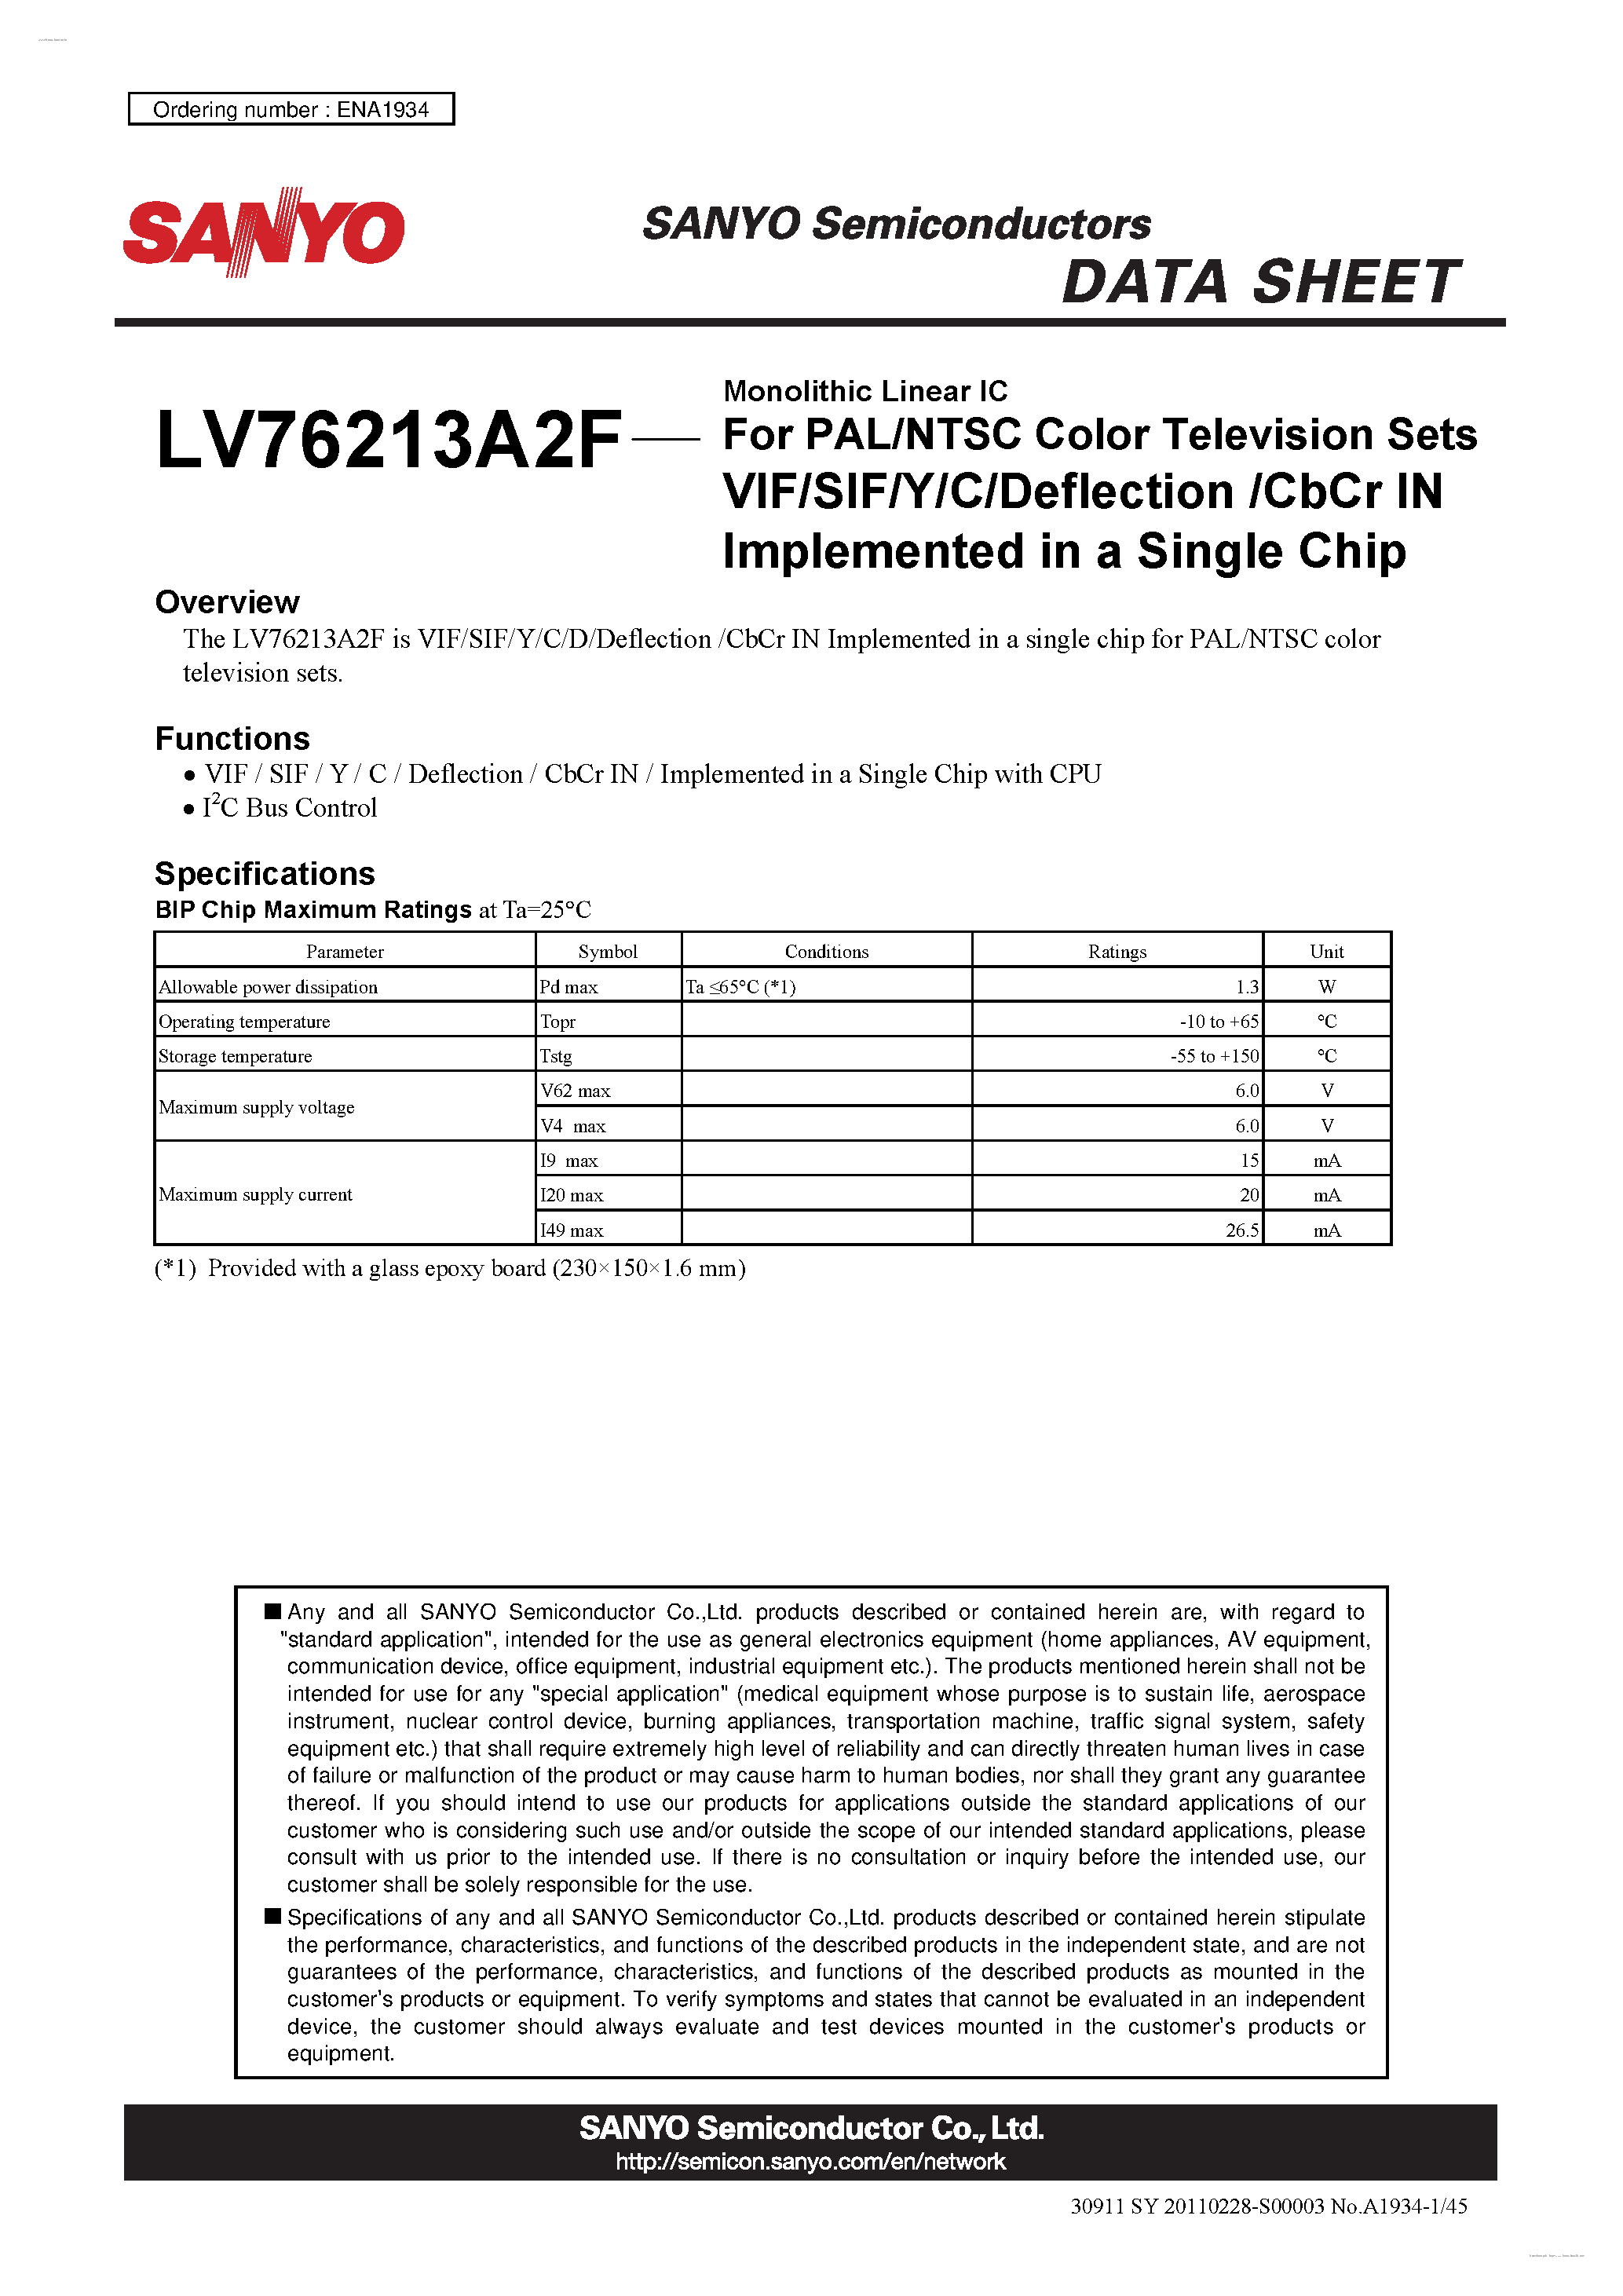 Даташит LV76213A2F - VIF/SIF/Y/C/Deflection /CbCr IN Implemented in a Single Chip страница 1